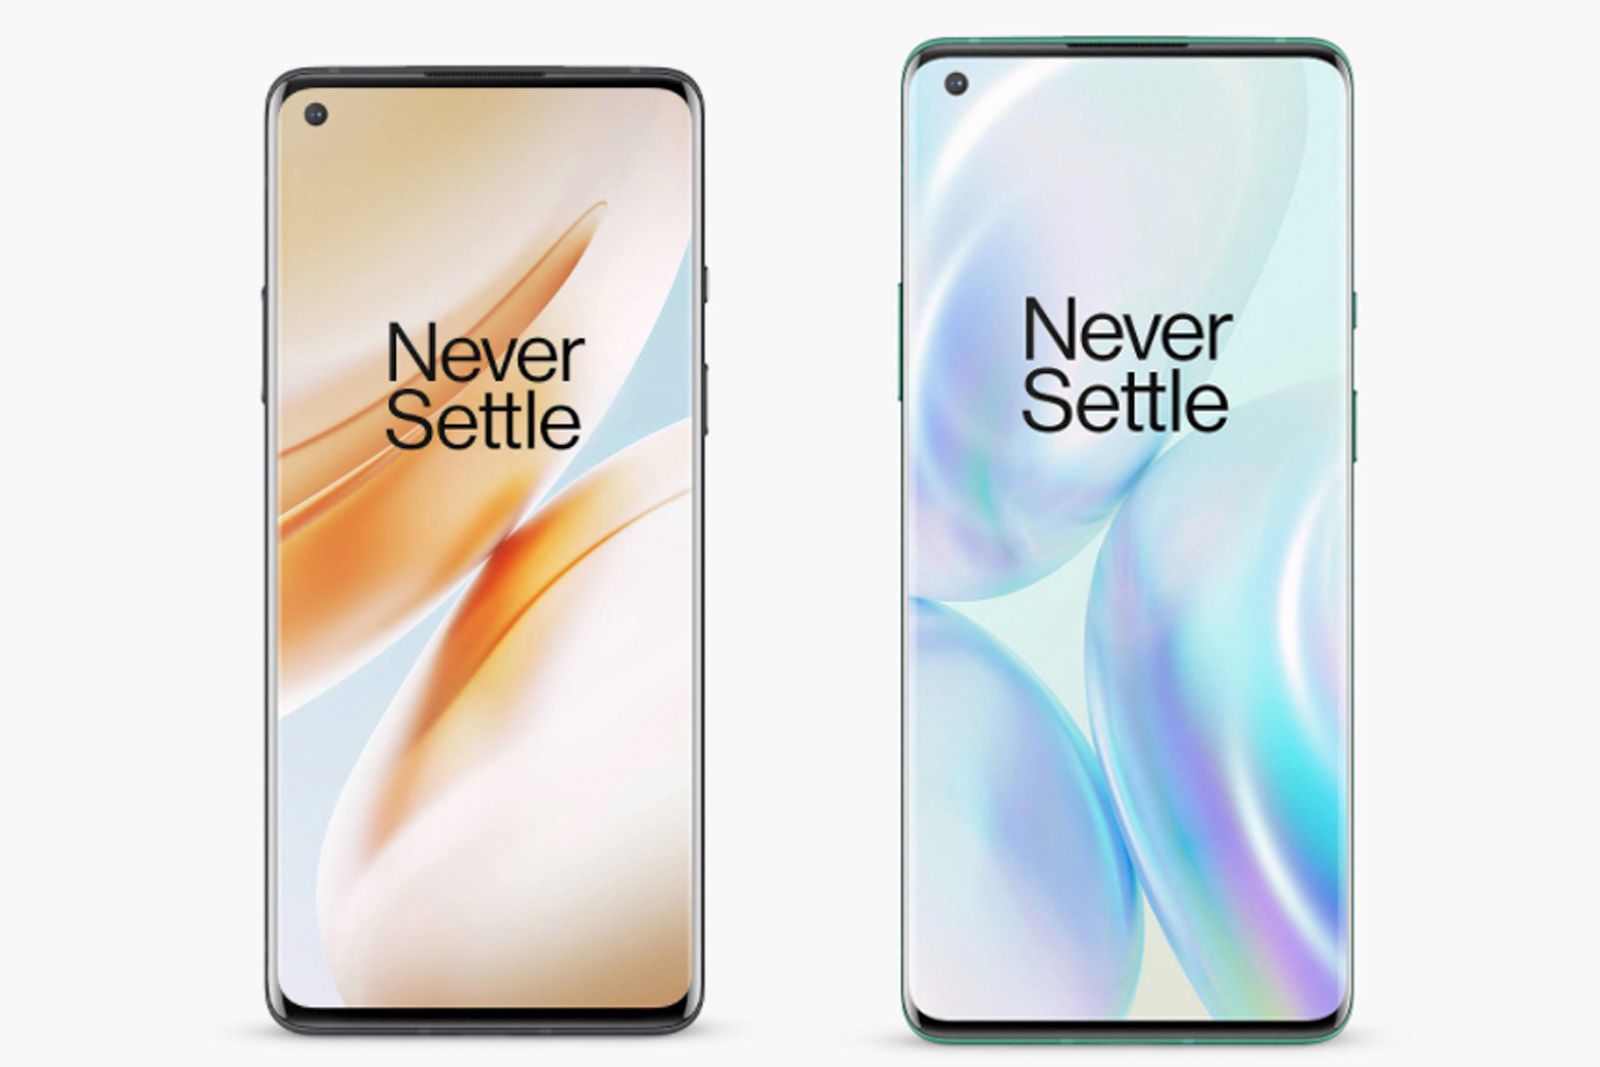 Retailers reveal full OnePlus 8 specs and prices hours before launch image 1